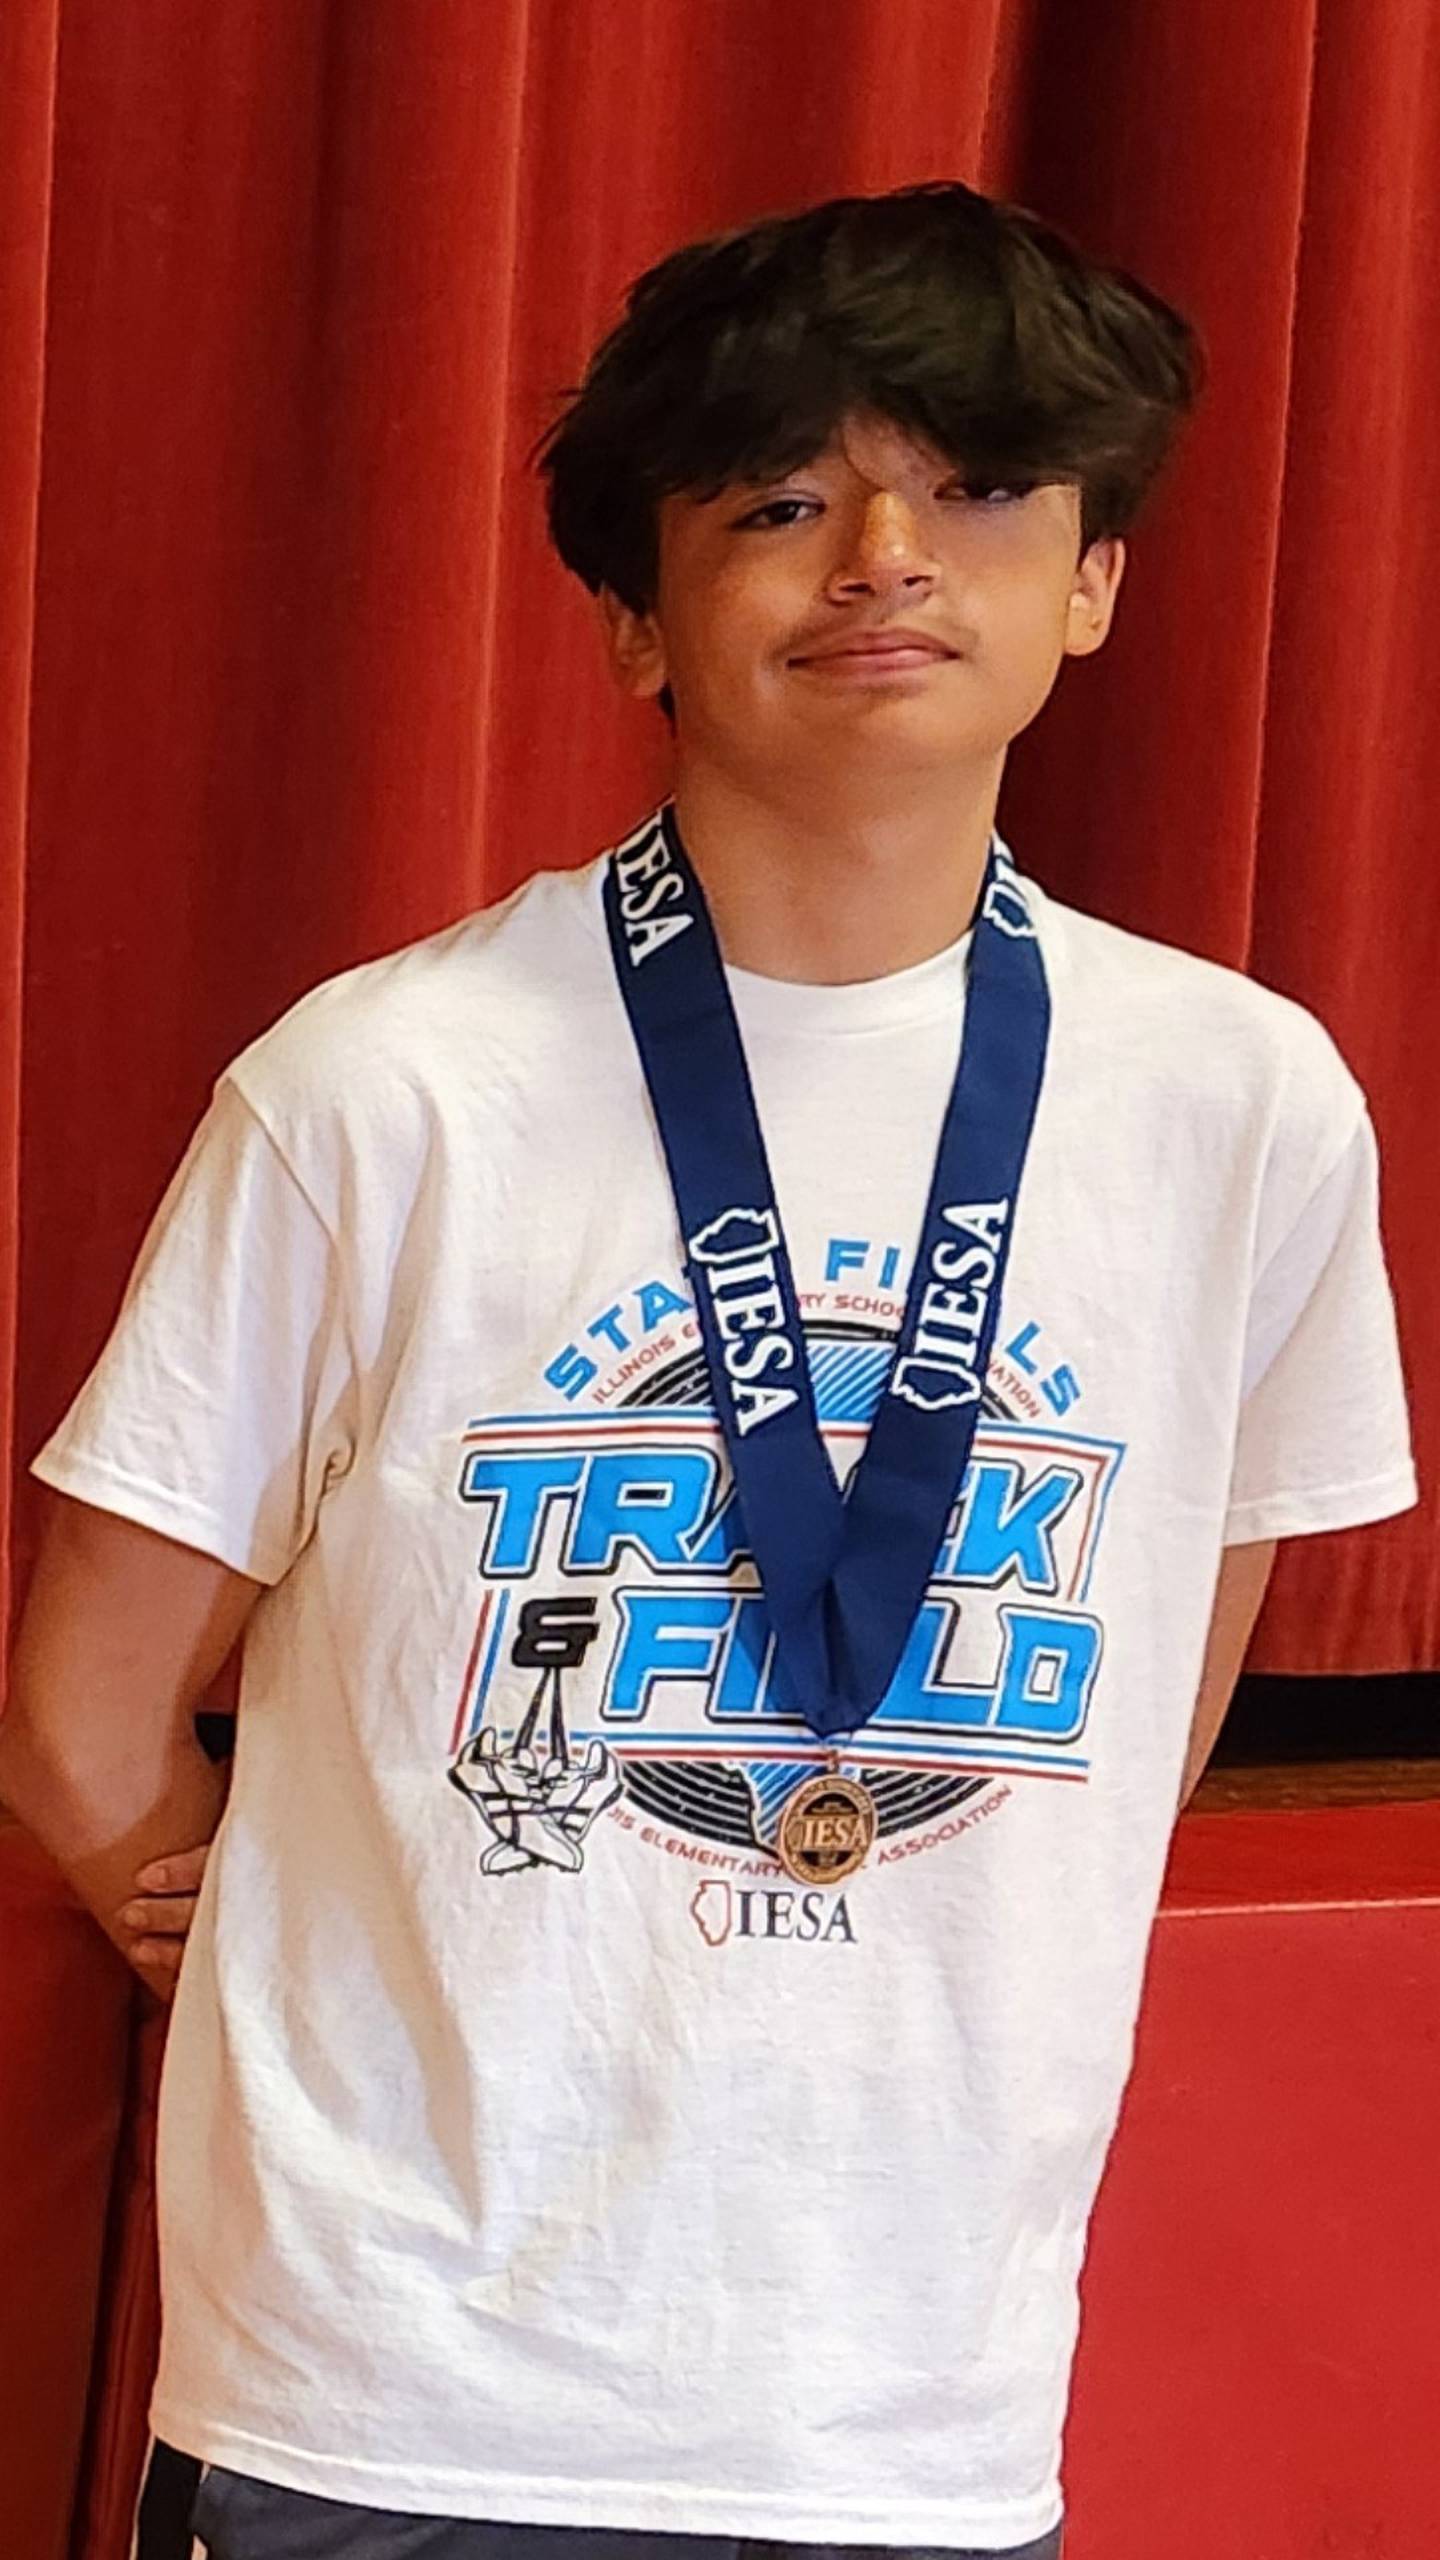 Malden's Joseph Perez placed eighth in the 1A seventh-grade high jump at state.